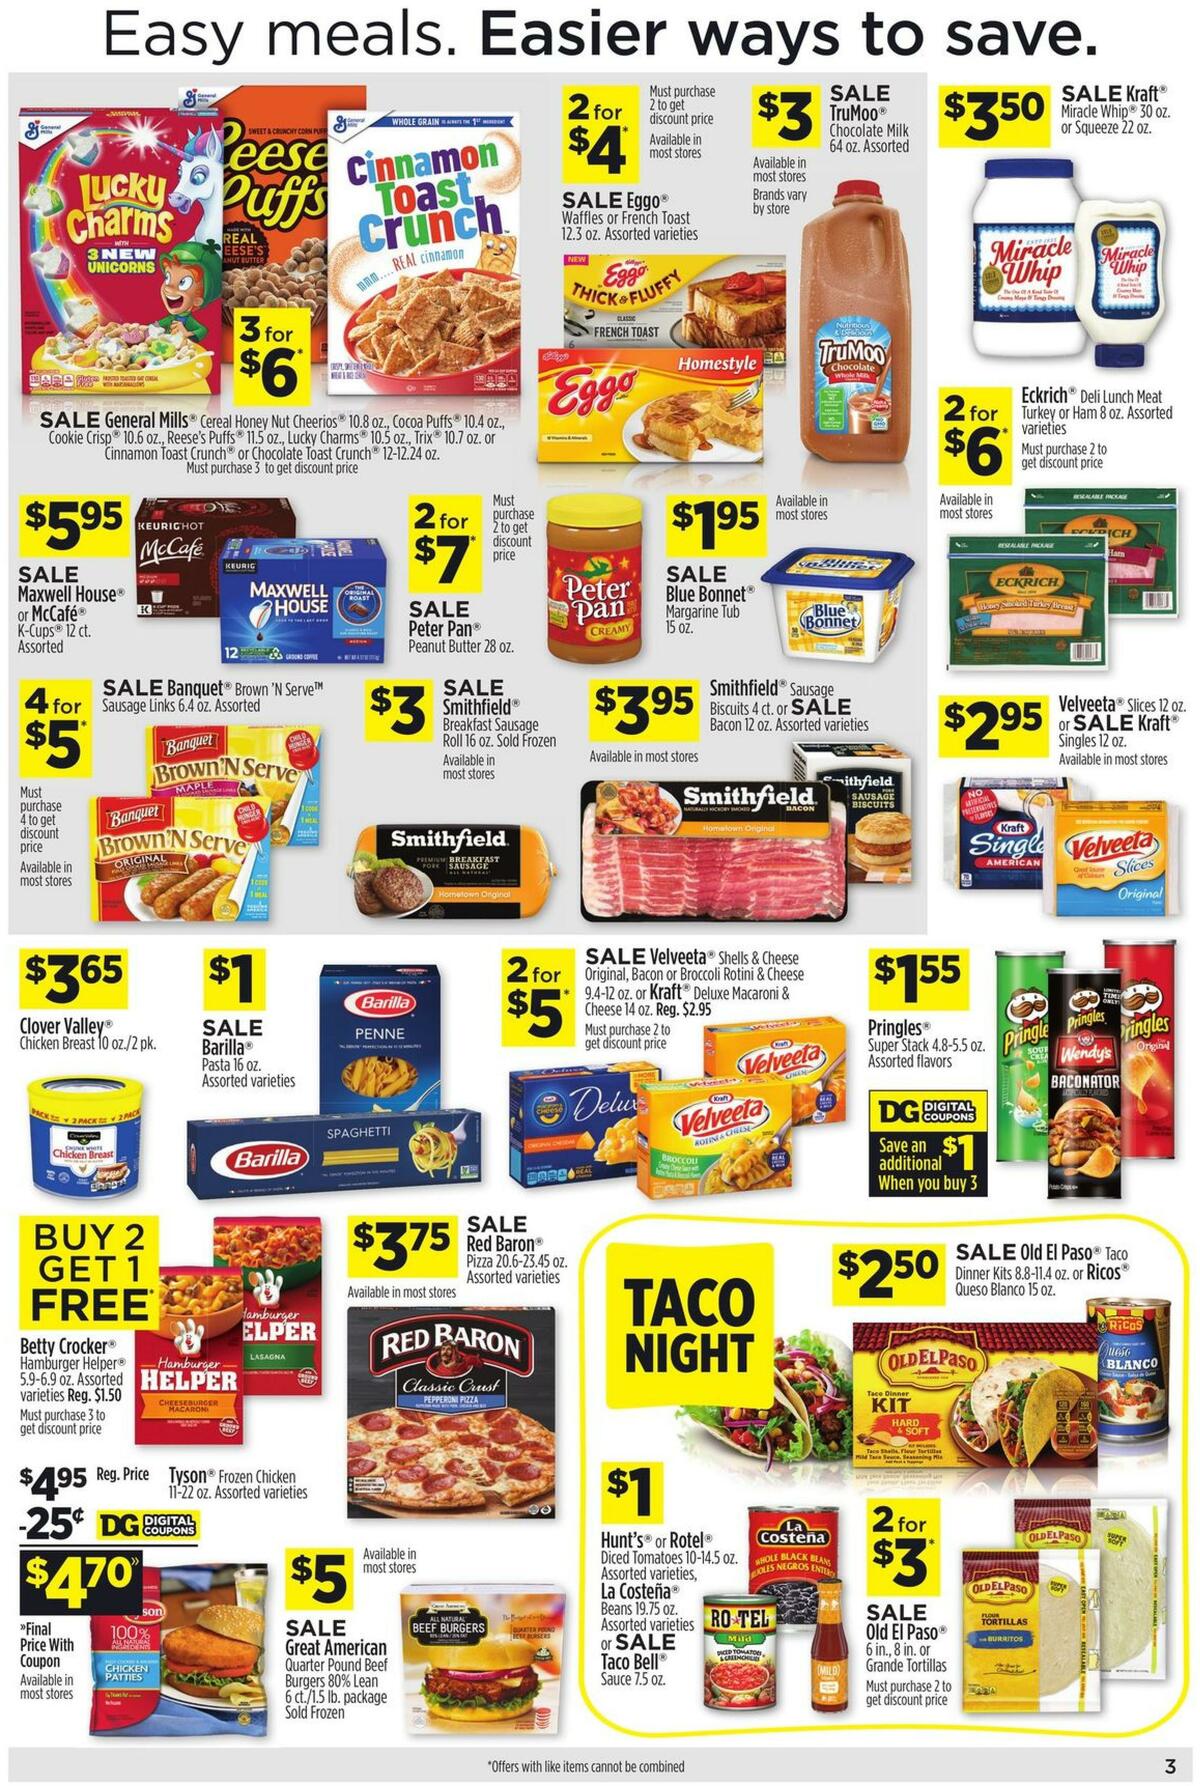 Dollar General Weekly Ads and Circulars for August 2 - Page 4